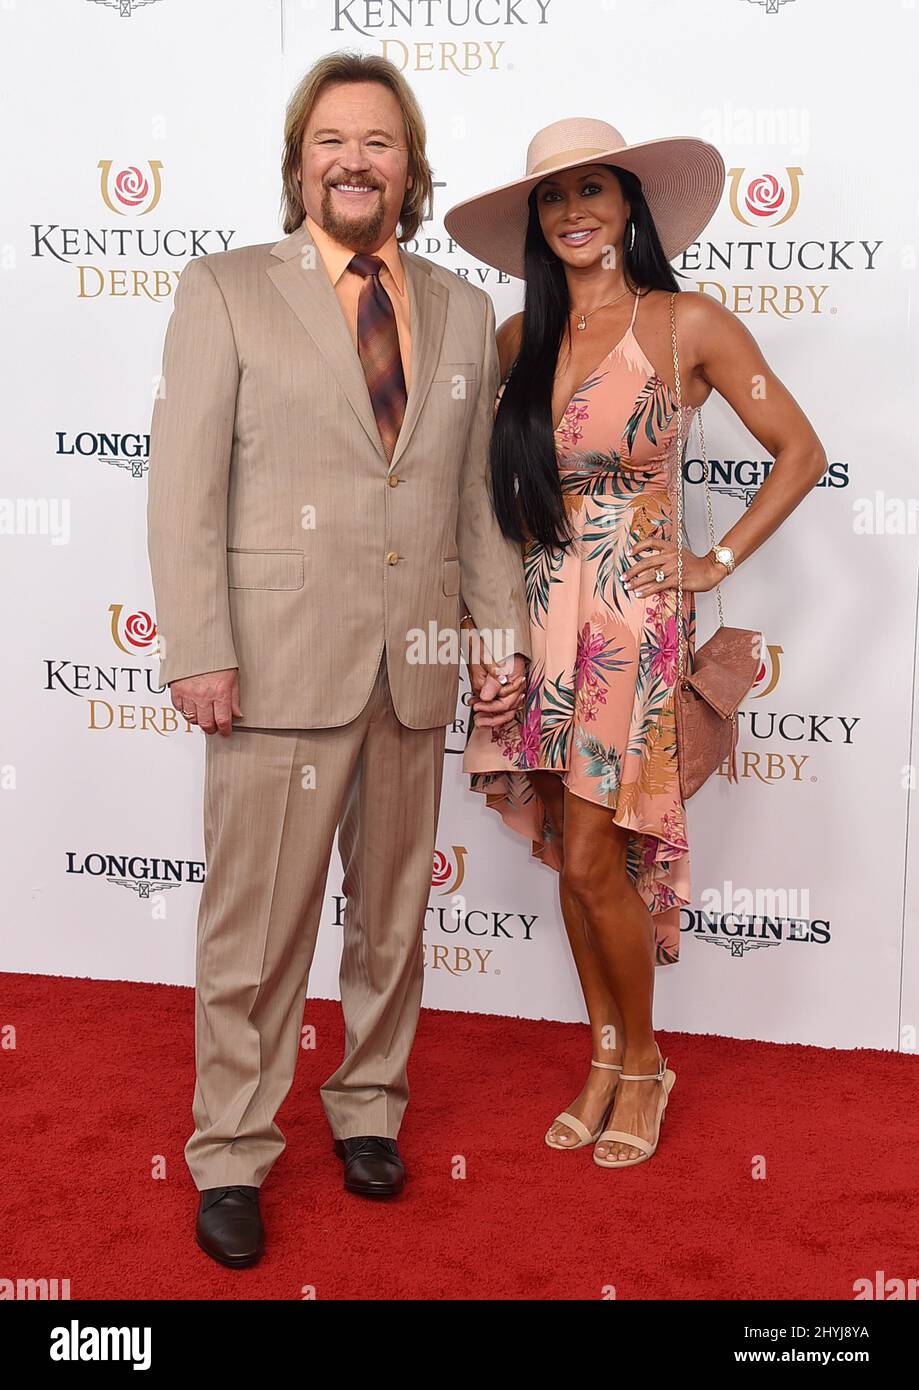 Travis Tritt and Theresa Nelson at the 2019 Kentucky Derby held at Churchill Downs on May 4, 2019 in Louisville, KY Stock Photo